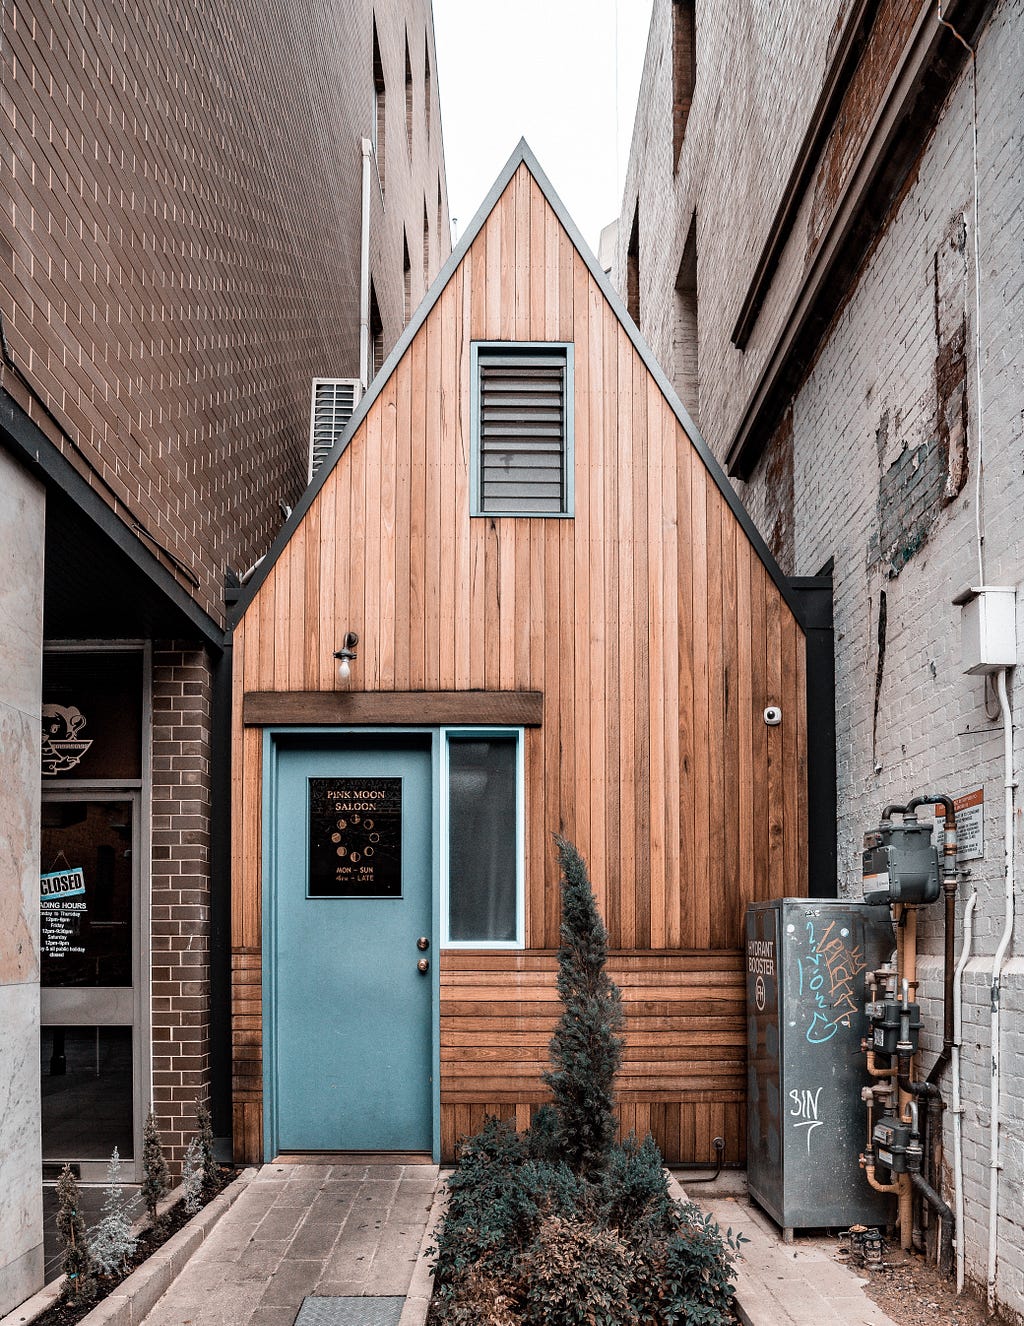 A tiny wooden house with a blue door, built between two brick building walls.